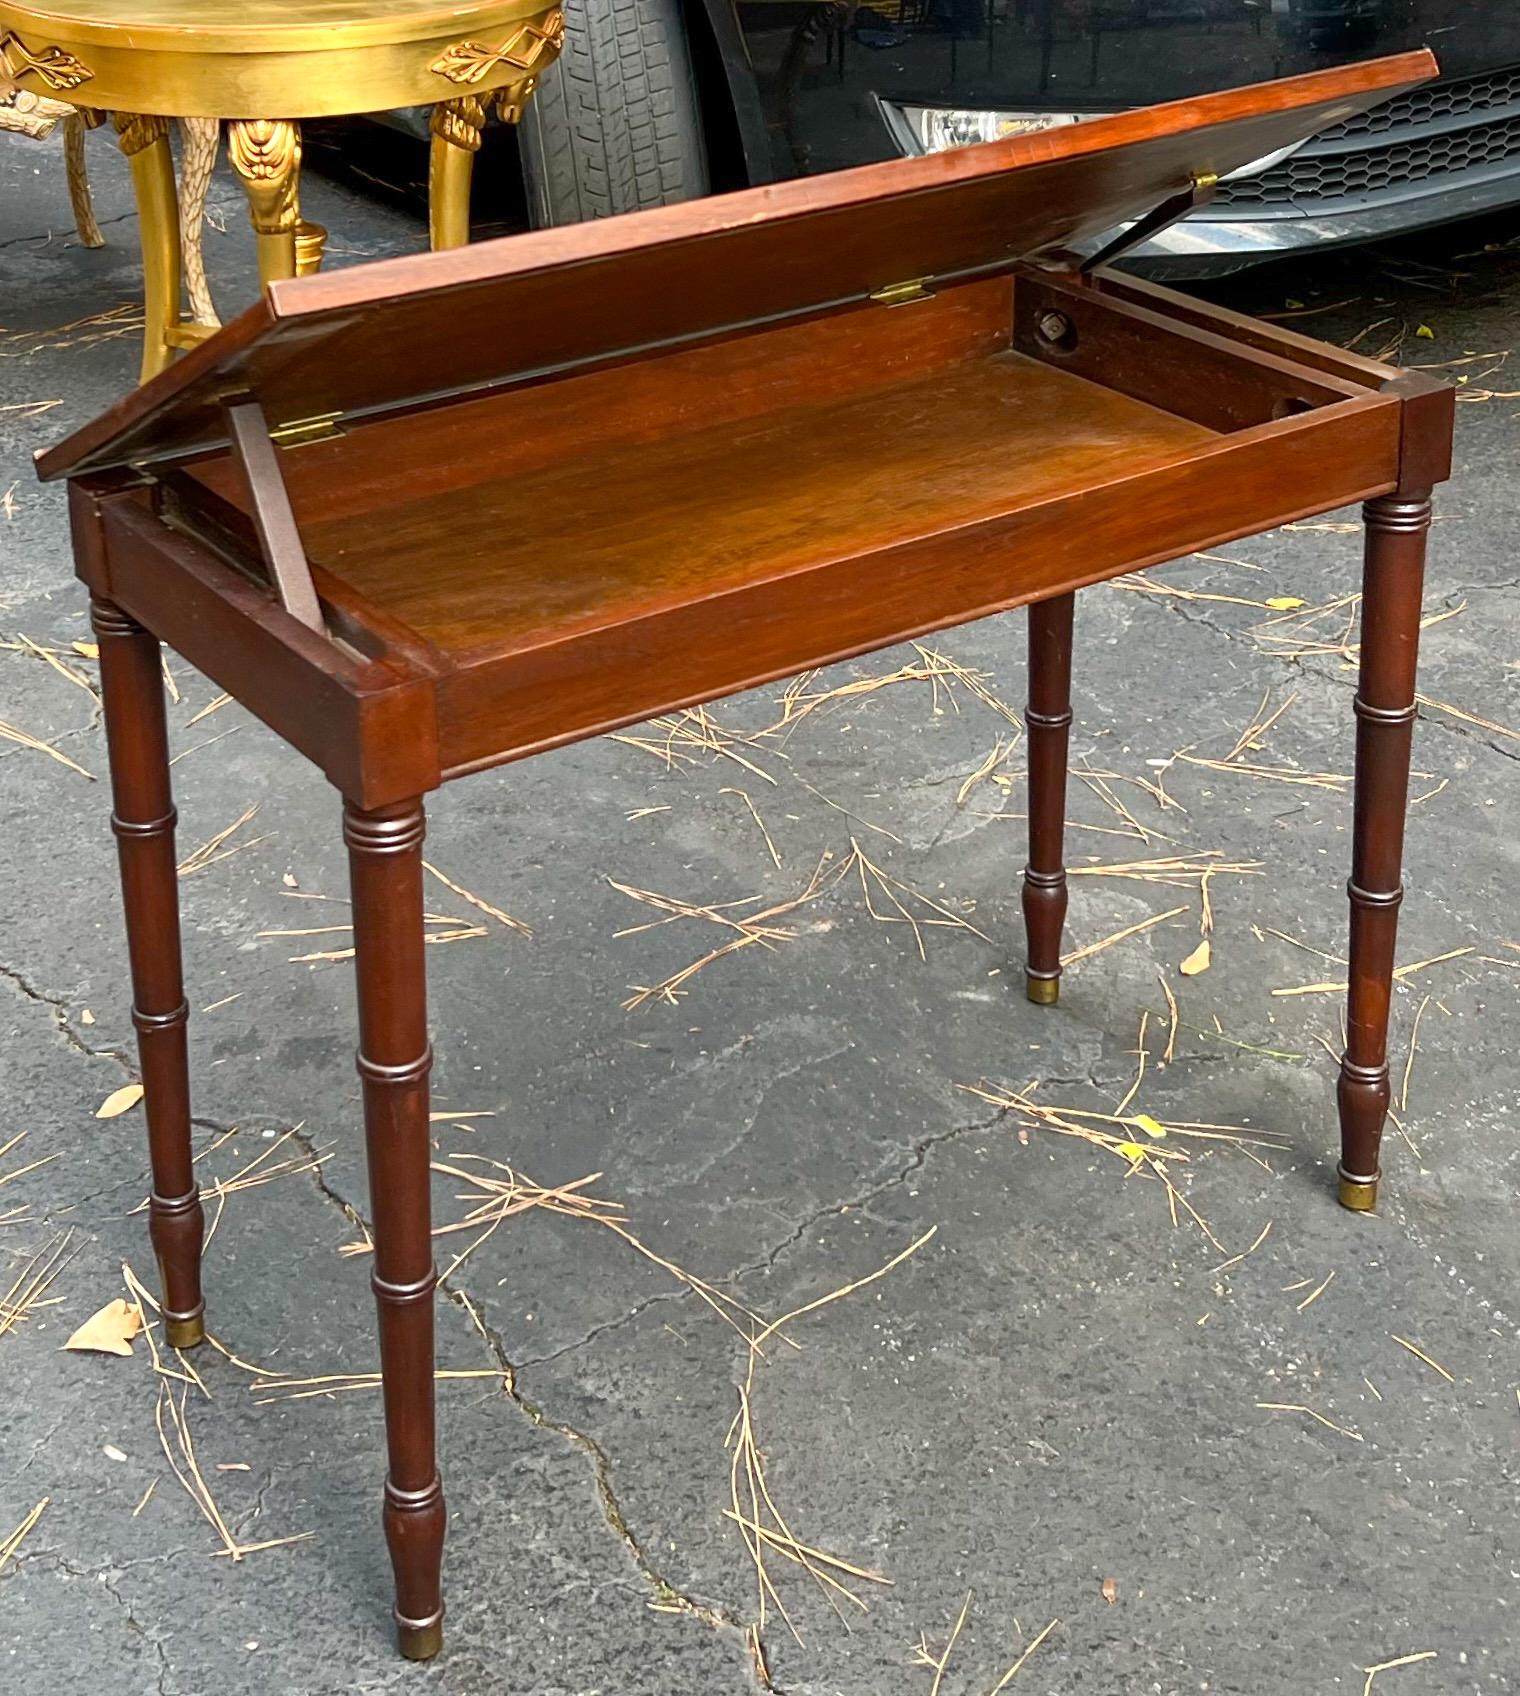 19th Century 19th-C. English Regency Mahogany Lift Top Faux Bamboo Side / Console Tables -S/2